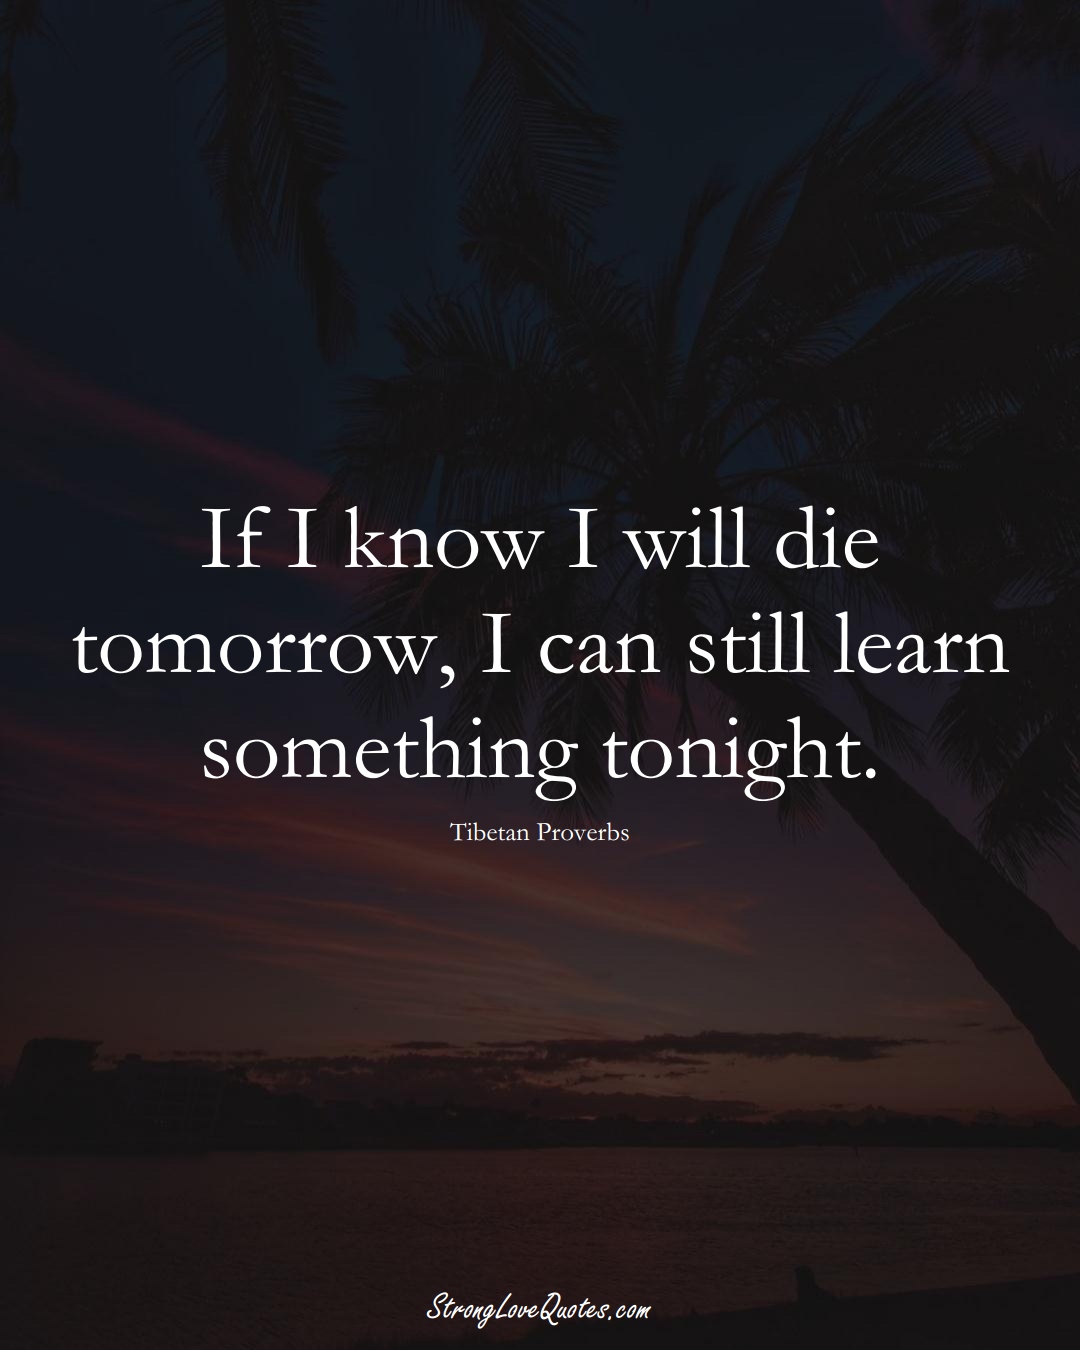 If I know I will die tomorrow, I can still learn something tonight. (Tibetan Sayings);  #aVarietyofCulturesSayings